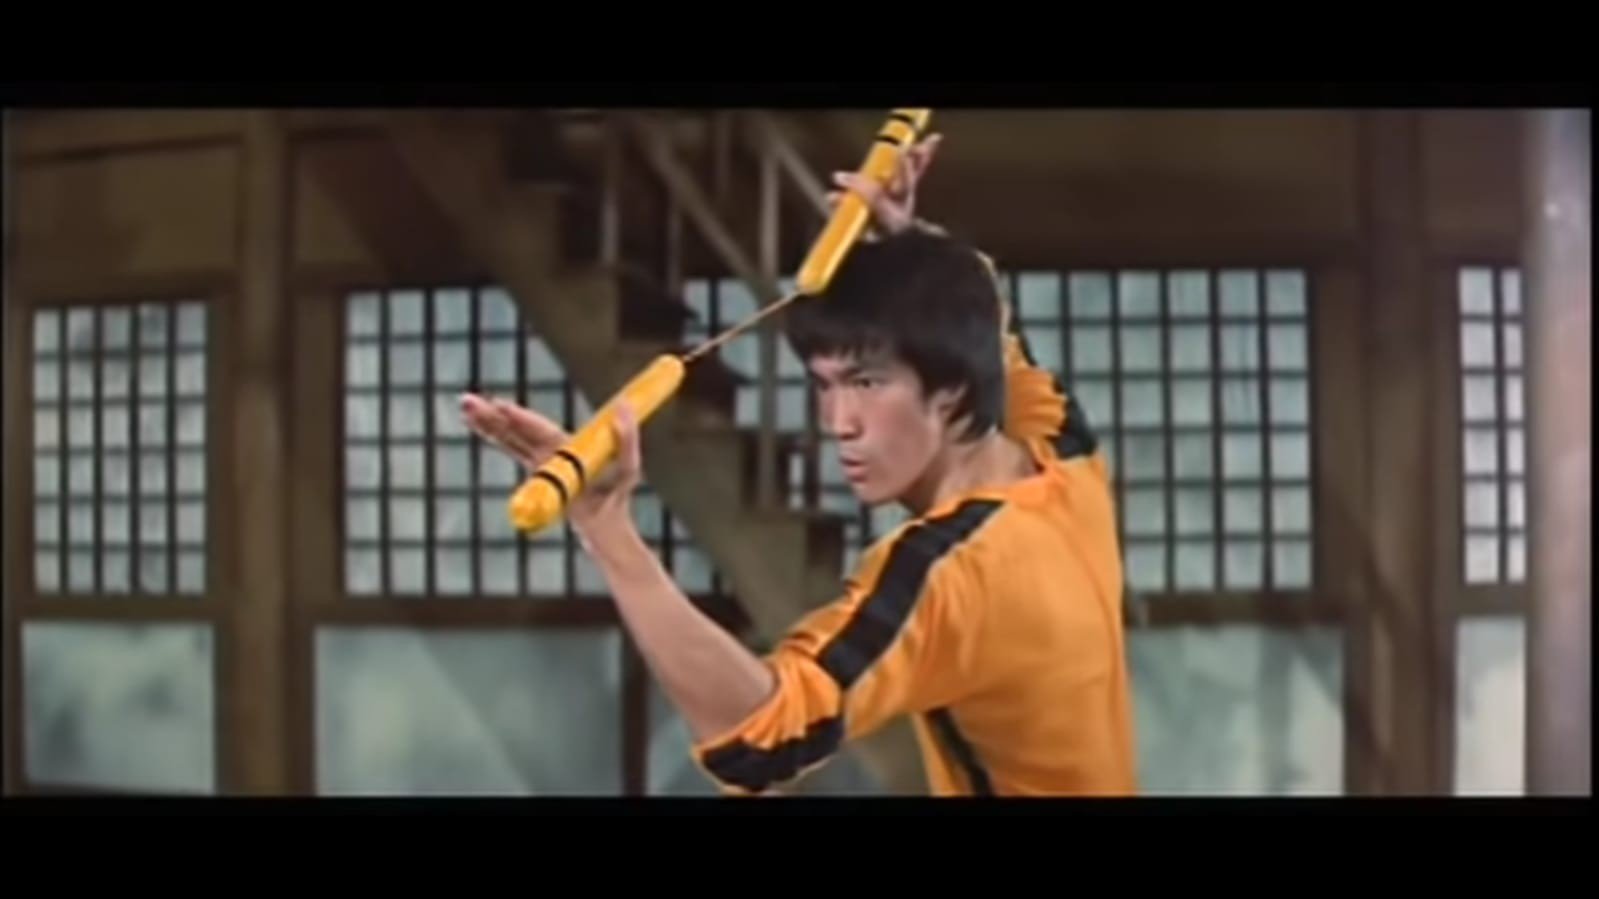 Bruce Lee’s philosophy has become a symbol for the anti-government protests. Photo: YouTube